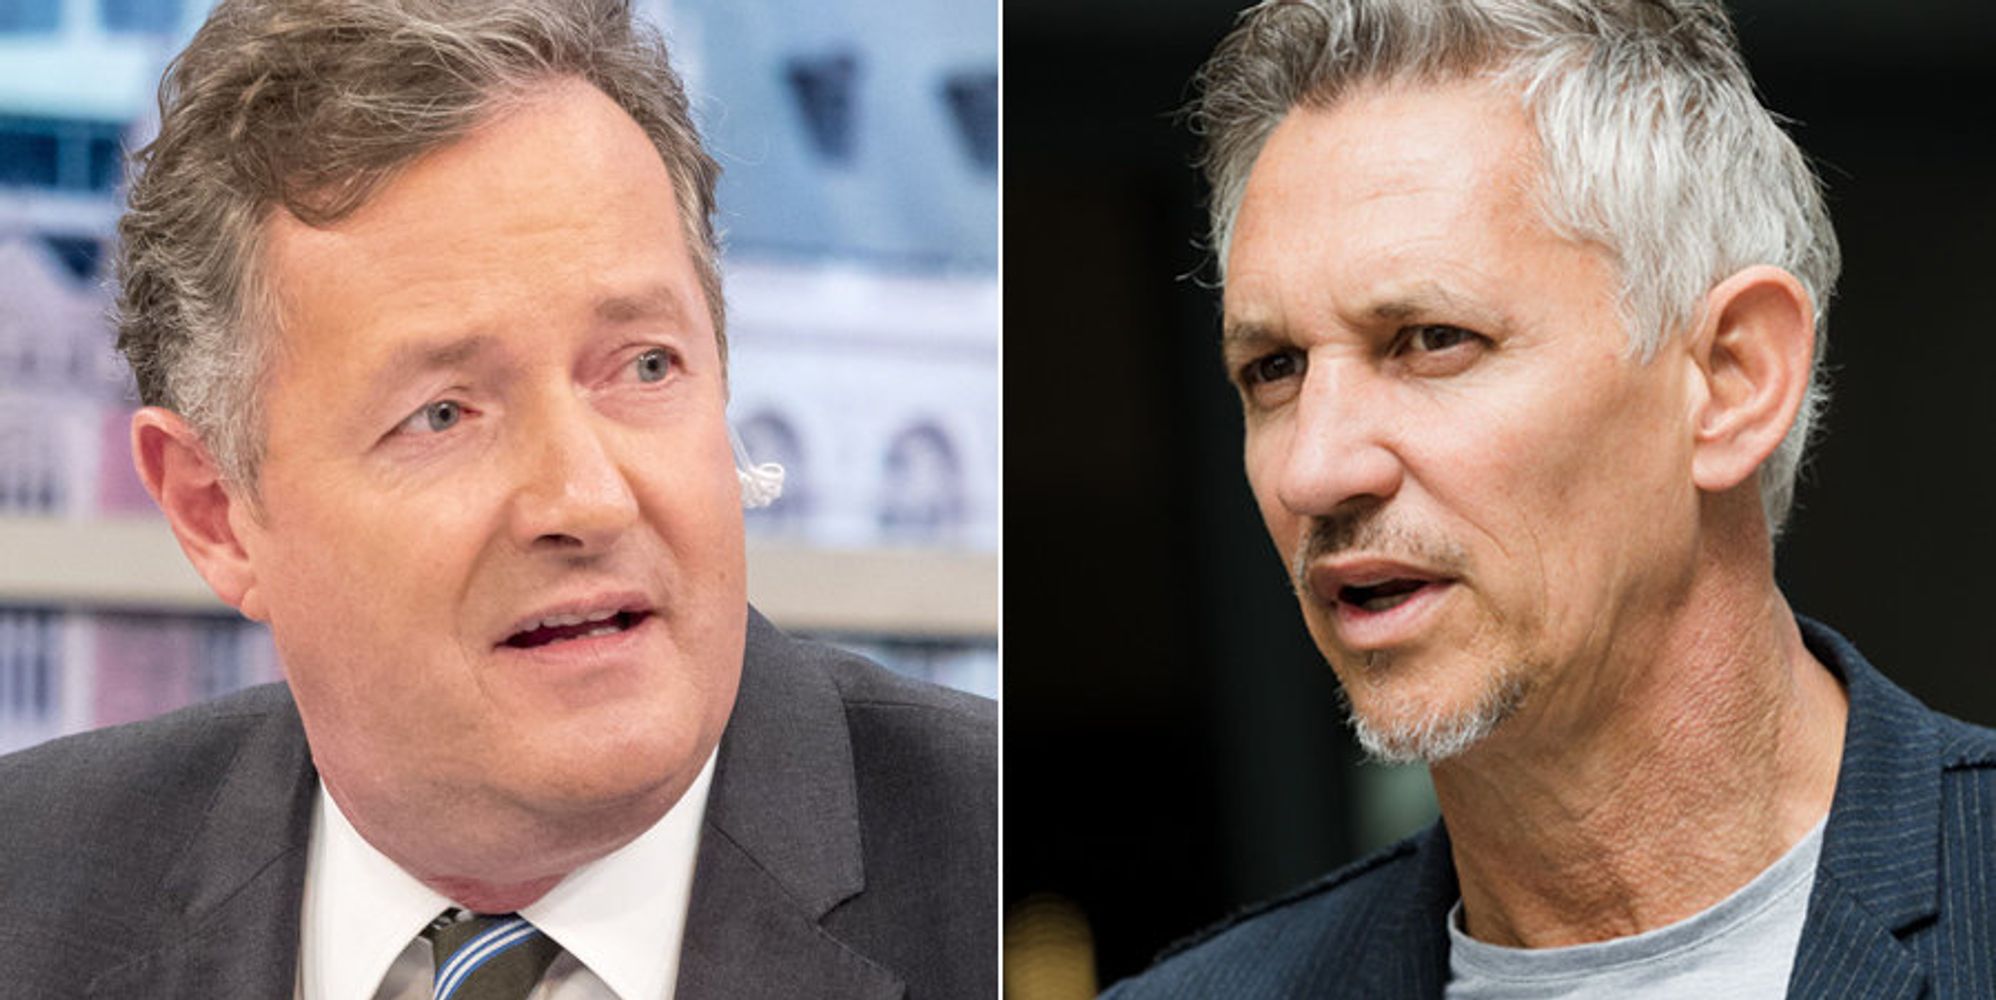 Gary Lineker's Latest Twitter Tussle With Piers Morgan Could Result In A £5000 Charity Donation - HuffPost UK